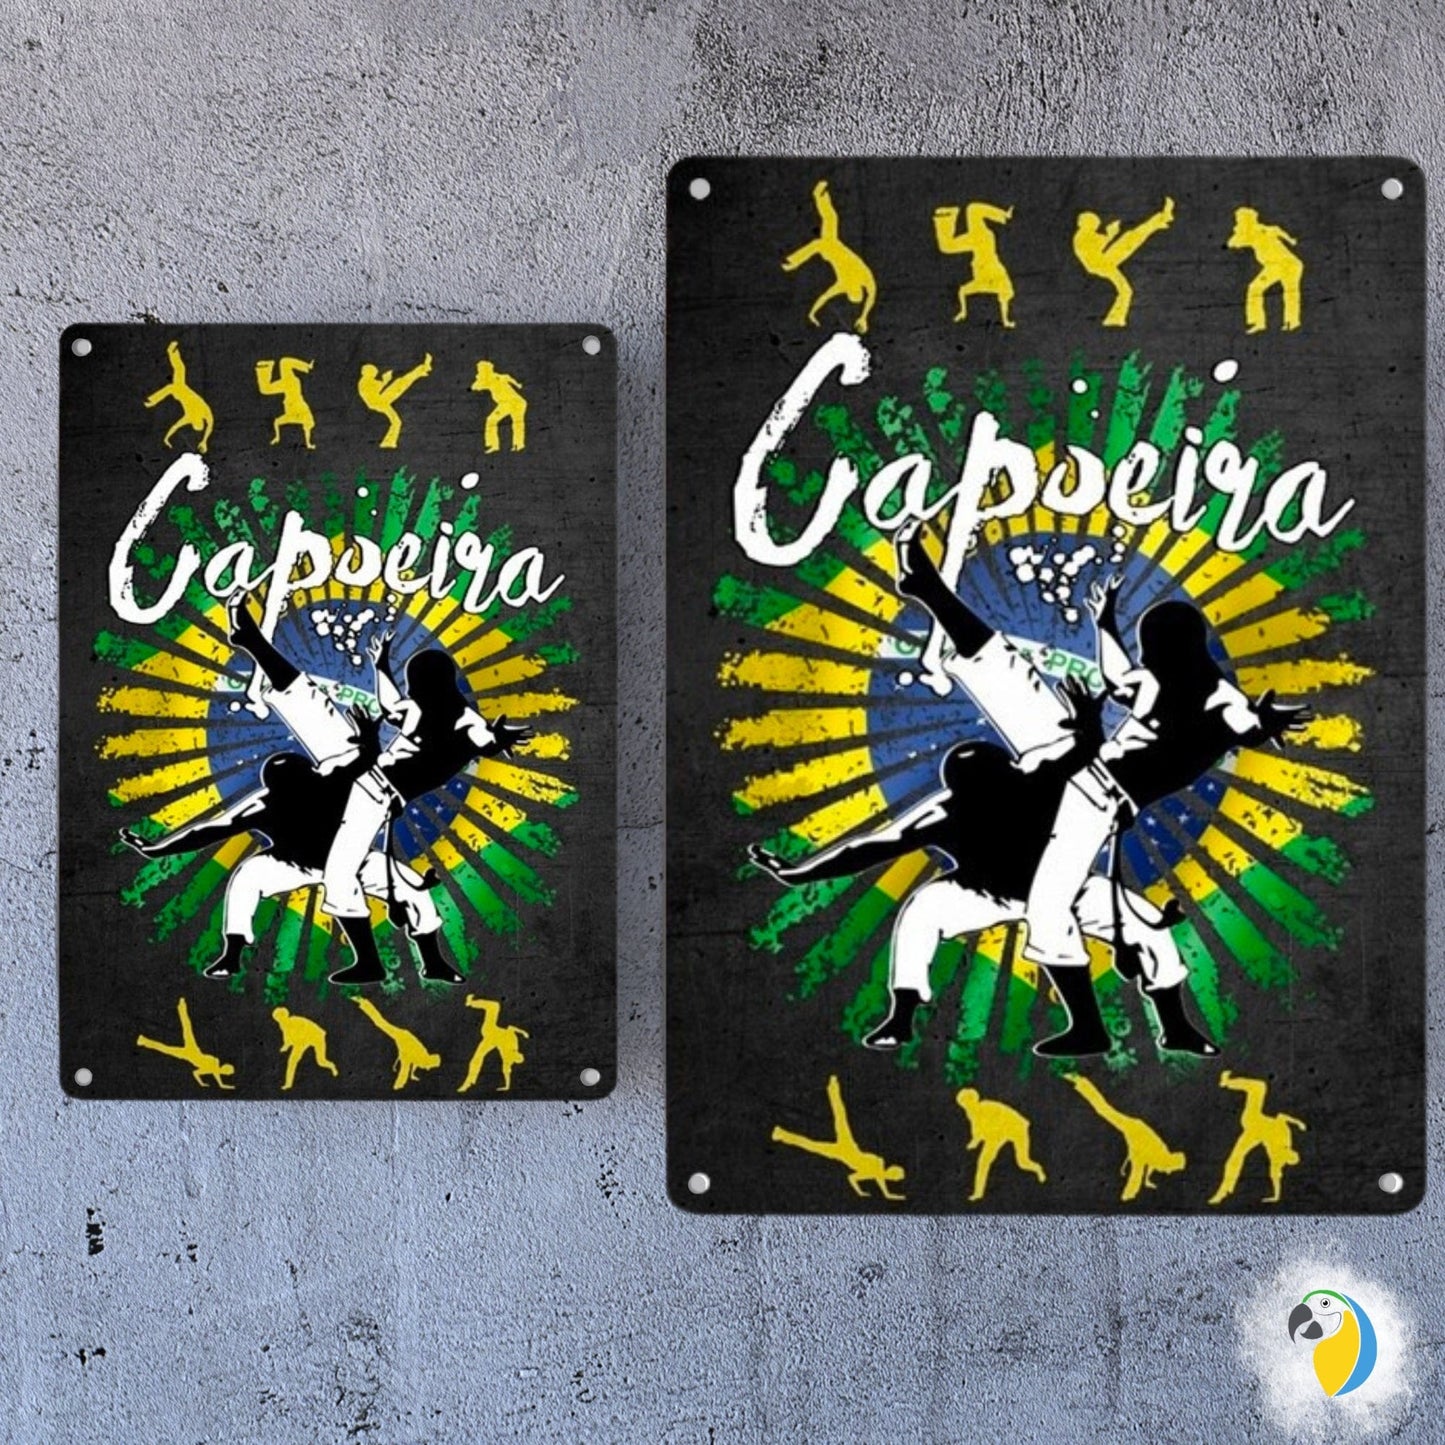 Brazil Capoeira Tin Sign | Afro Brazilian Fight Sport Dance Metal Print | Decorative Wall Hanging For Tropical Shabby Chic Decor